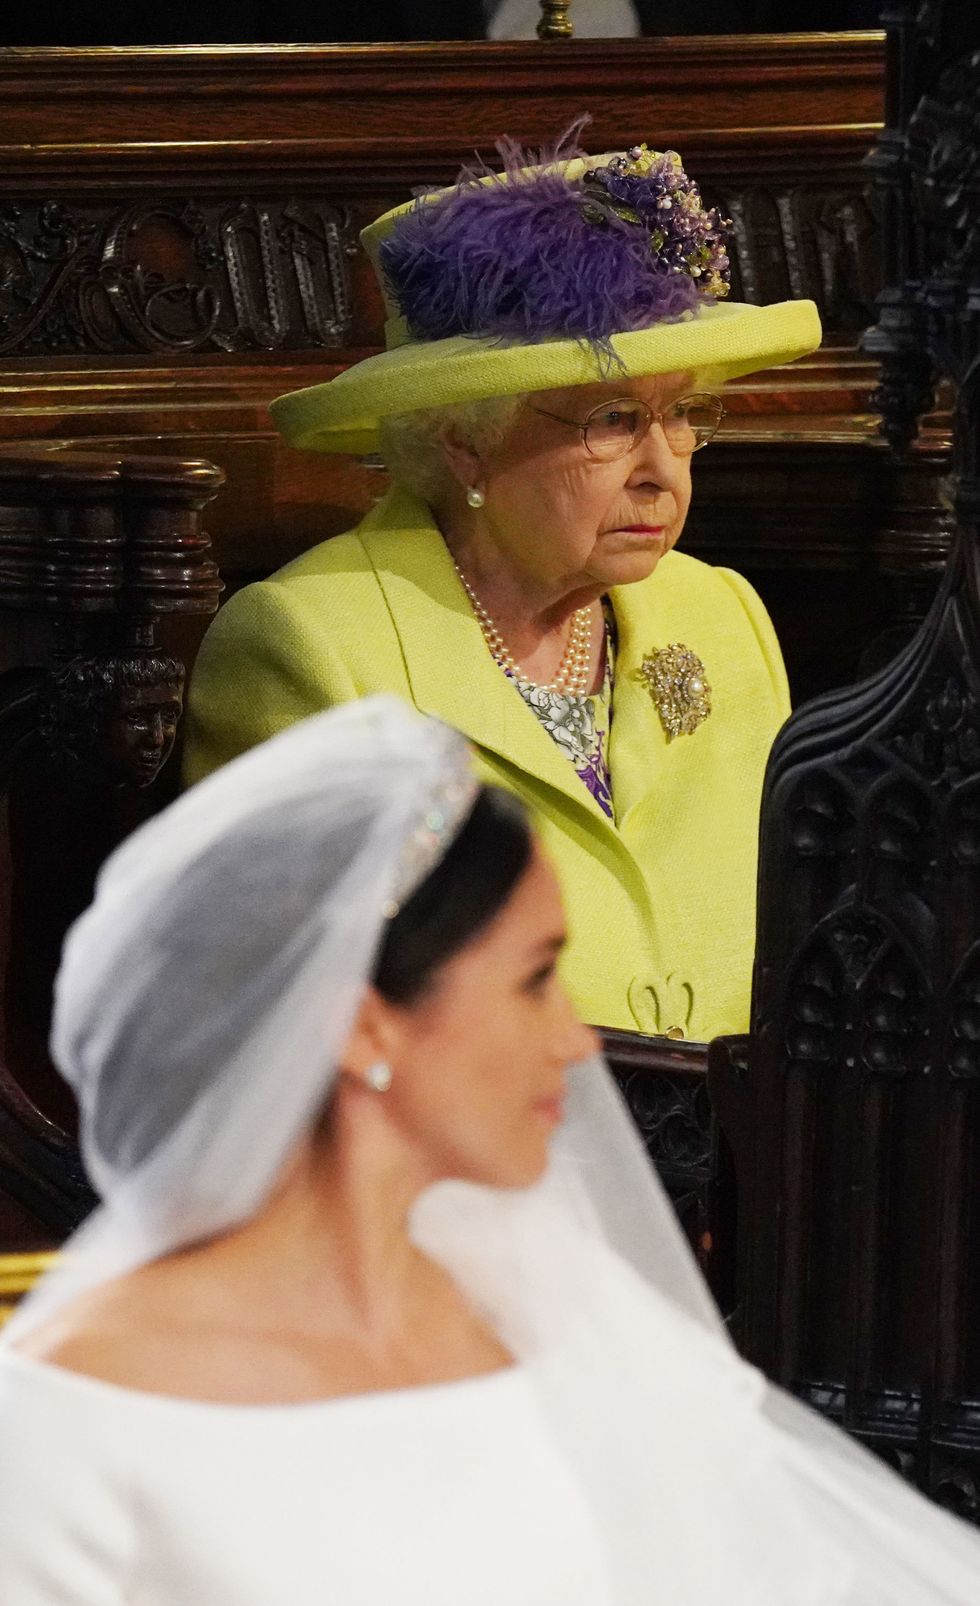 Queen Elizabeth II during the royal wedding ceremony at St. George's Chapel.